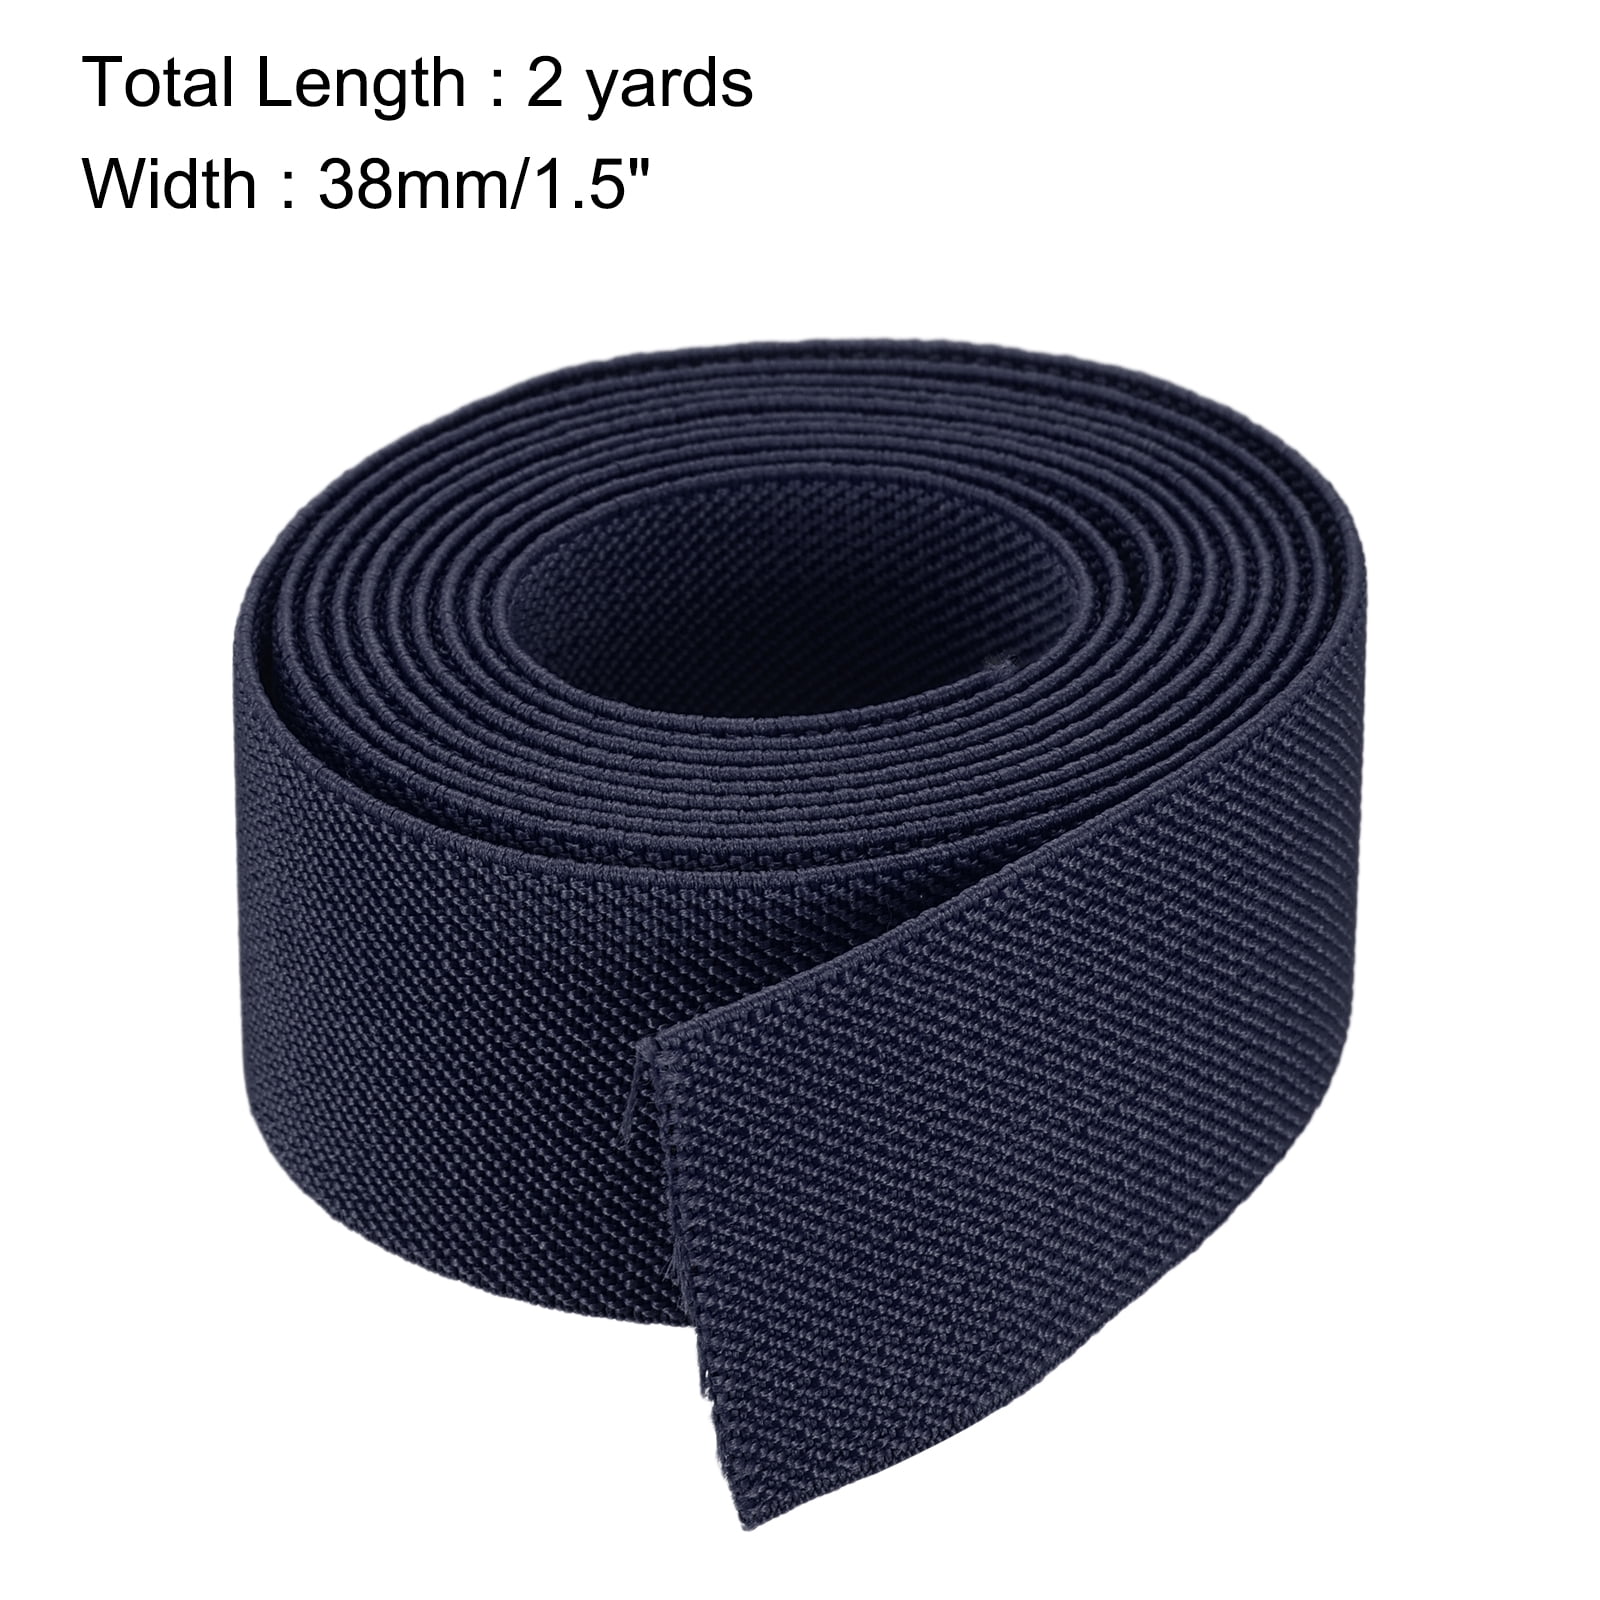 1/4 inch Woven Flat Ribbed Elastic | 519-14-01